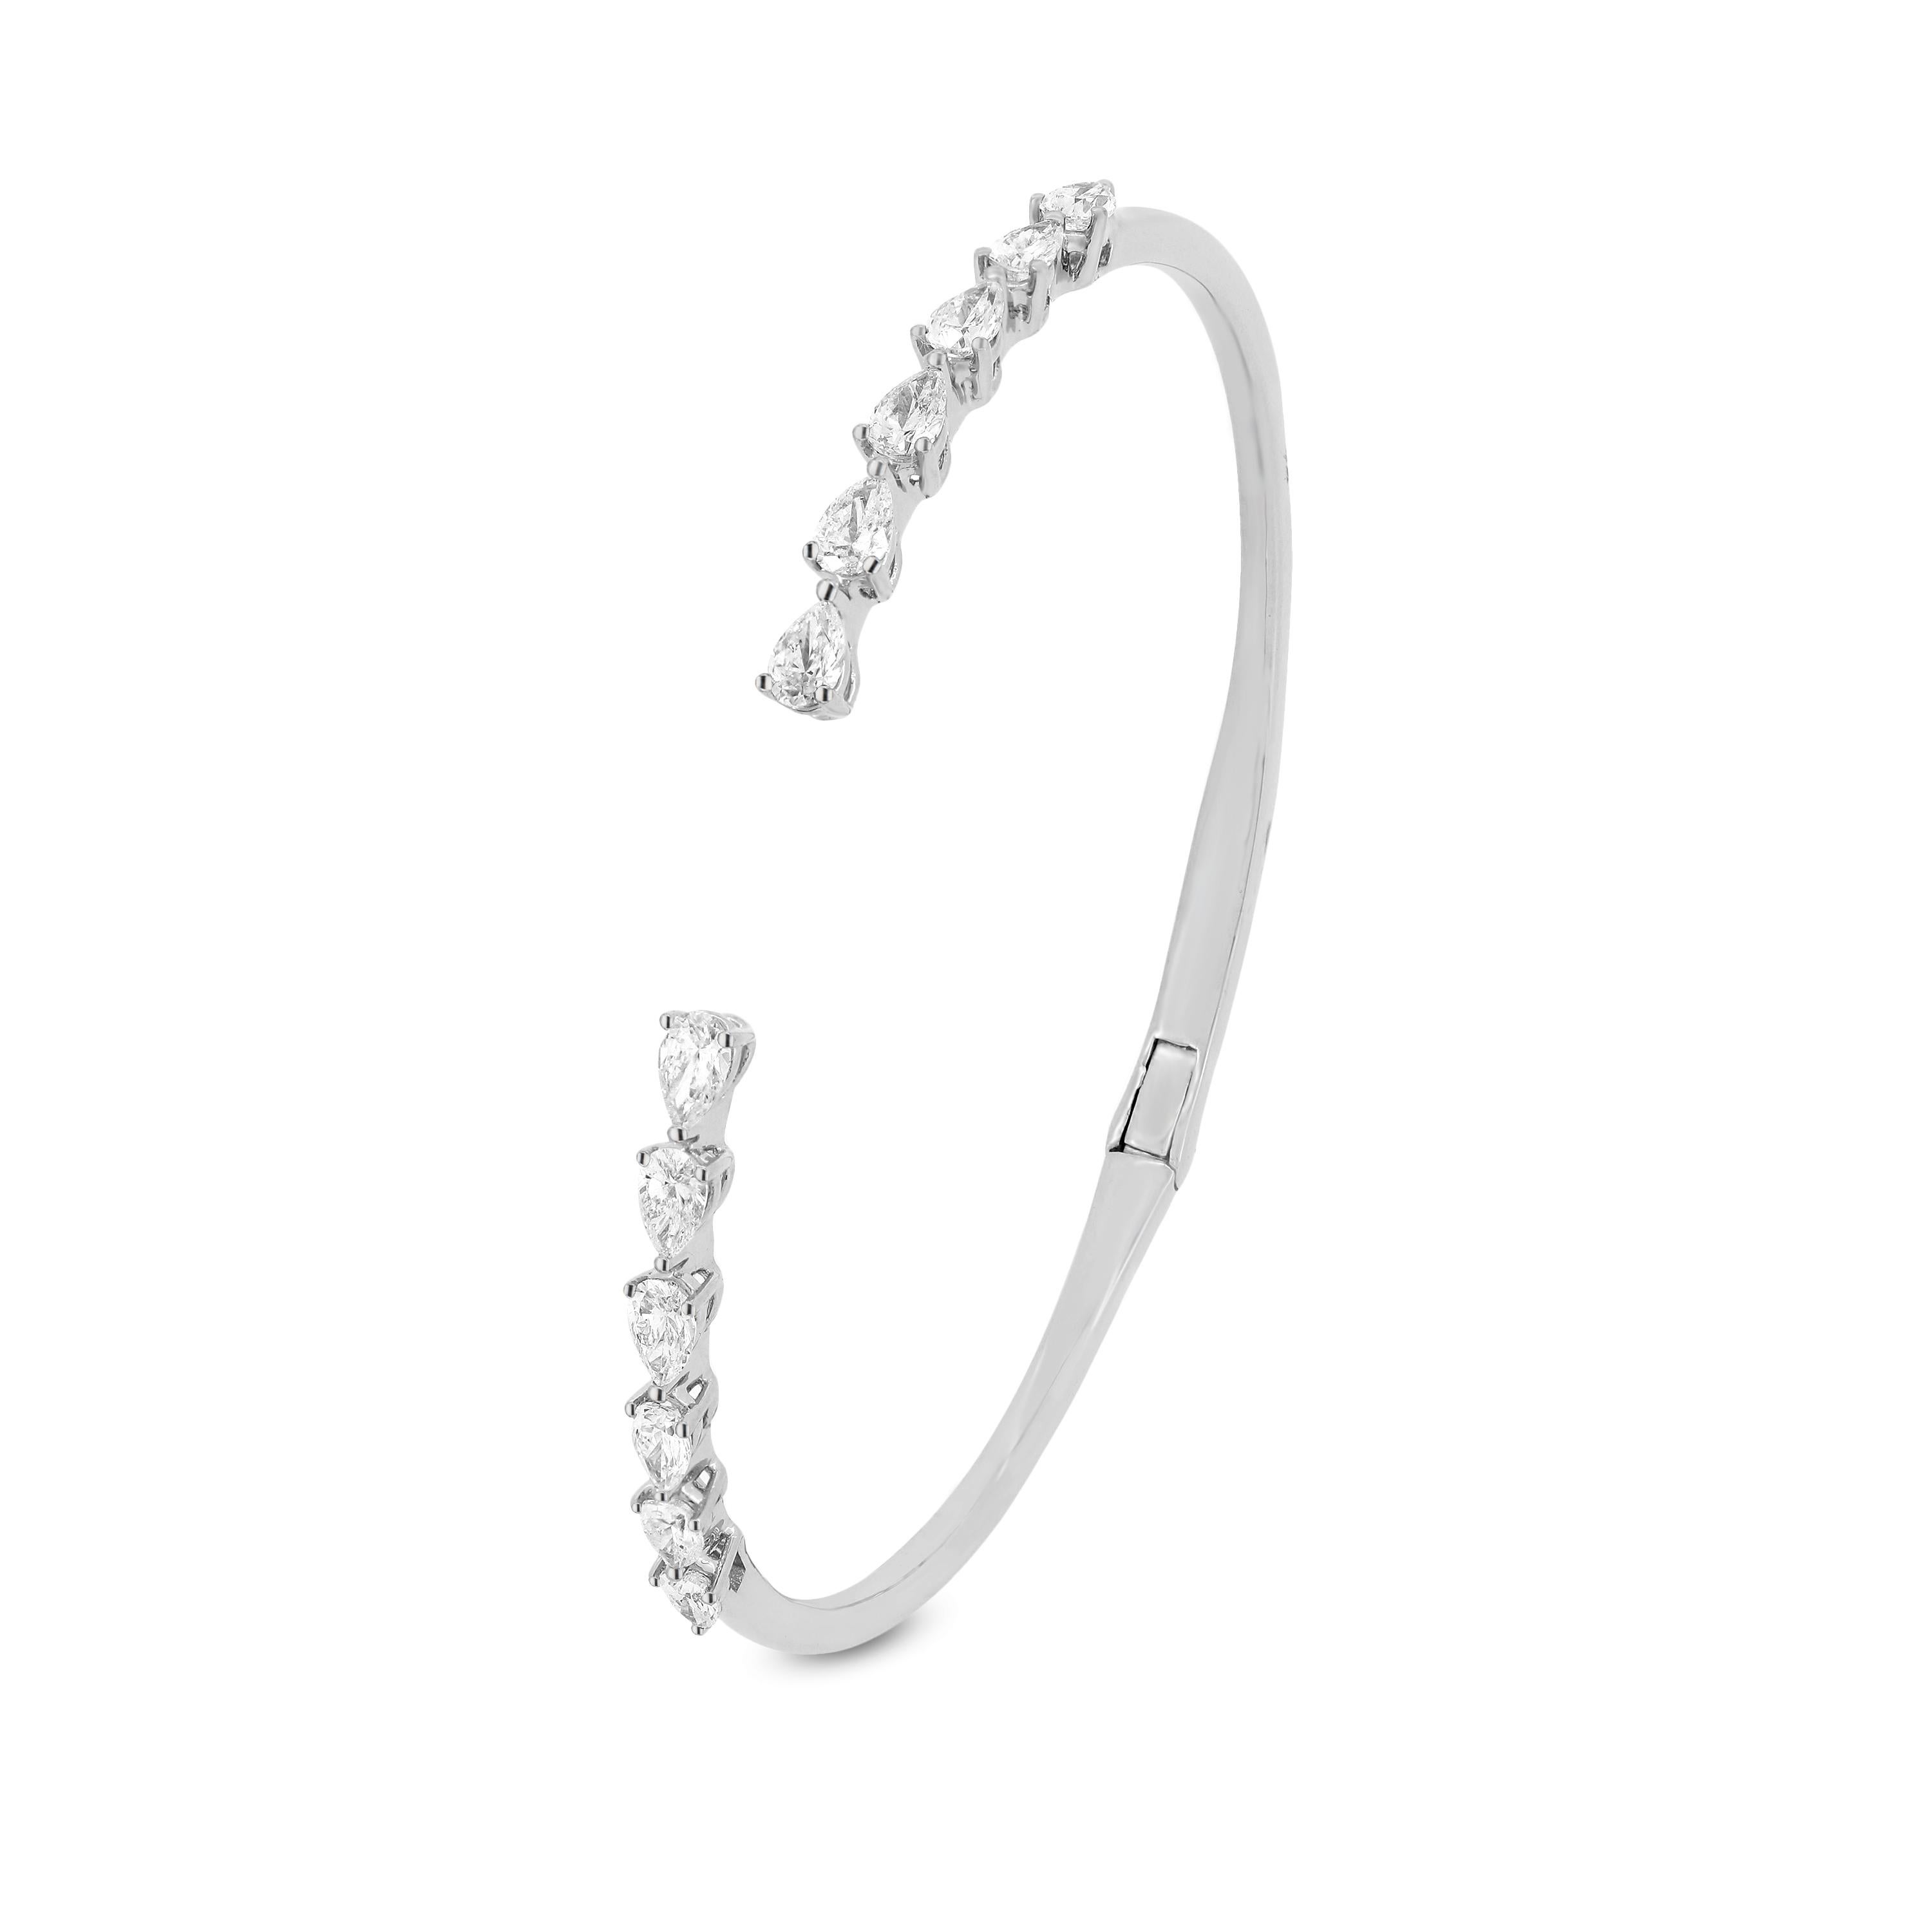 This cuff diamond bangle bracelet has 12 pear full cut White Diamonds crafted on an 18K white gold band. This minimal and sleek prong set diamond jewelry has 1.70 cwt of shining diamonds that adds an oomph factor to your wrist. The diamonds are SI1